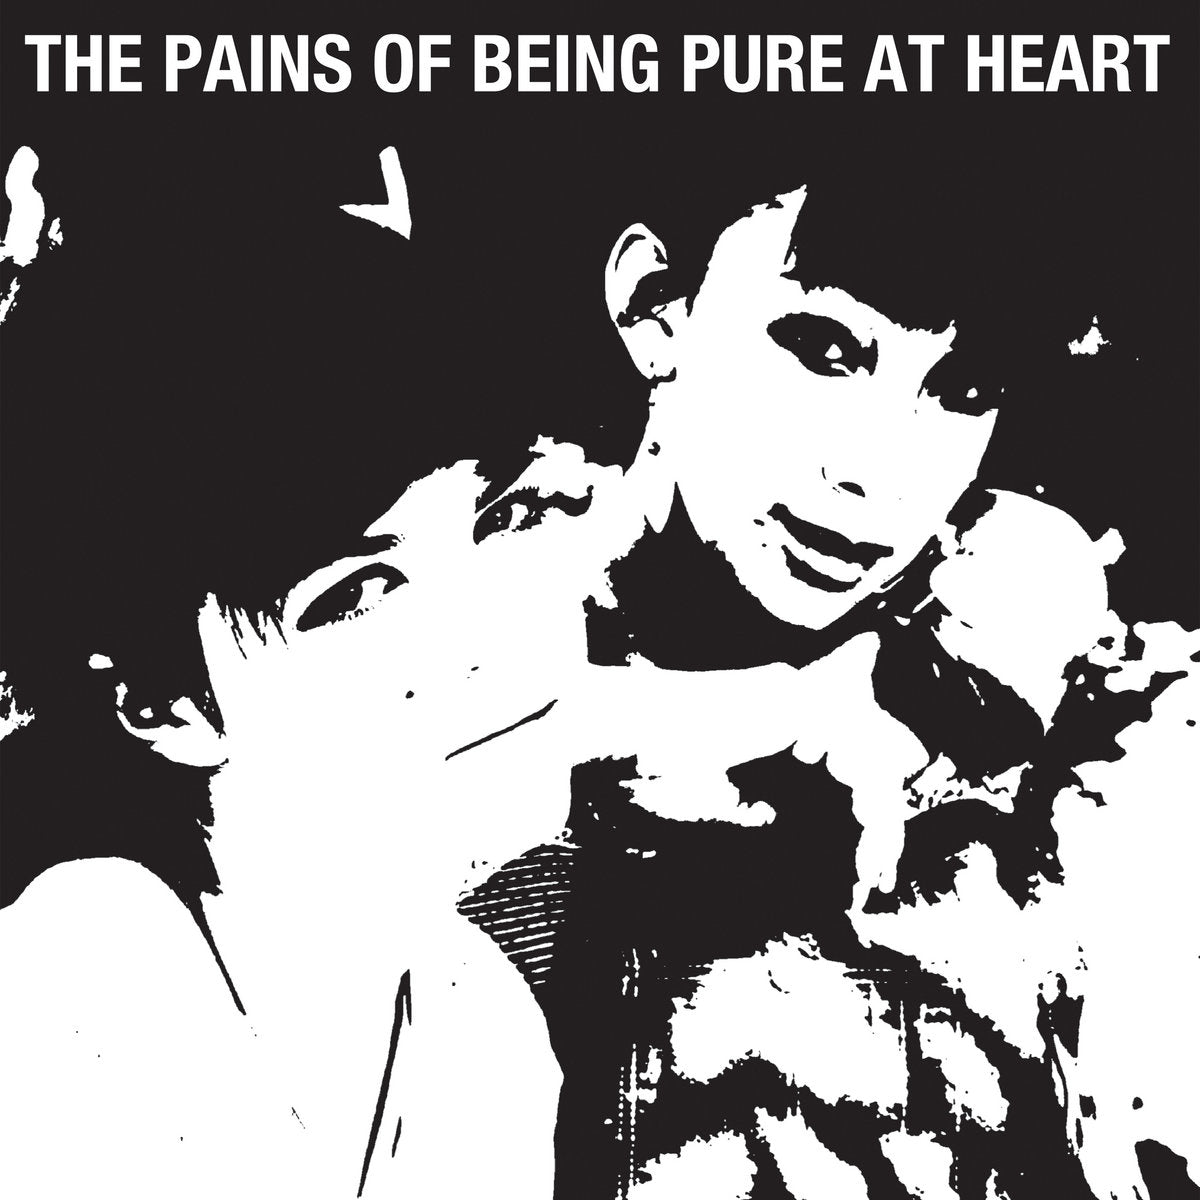 THE PAINS OF BEING PURE AT HEART - THE PAINS OF BEING PURE AT HEART Vinyl LP